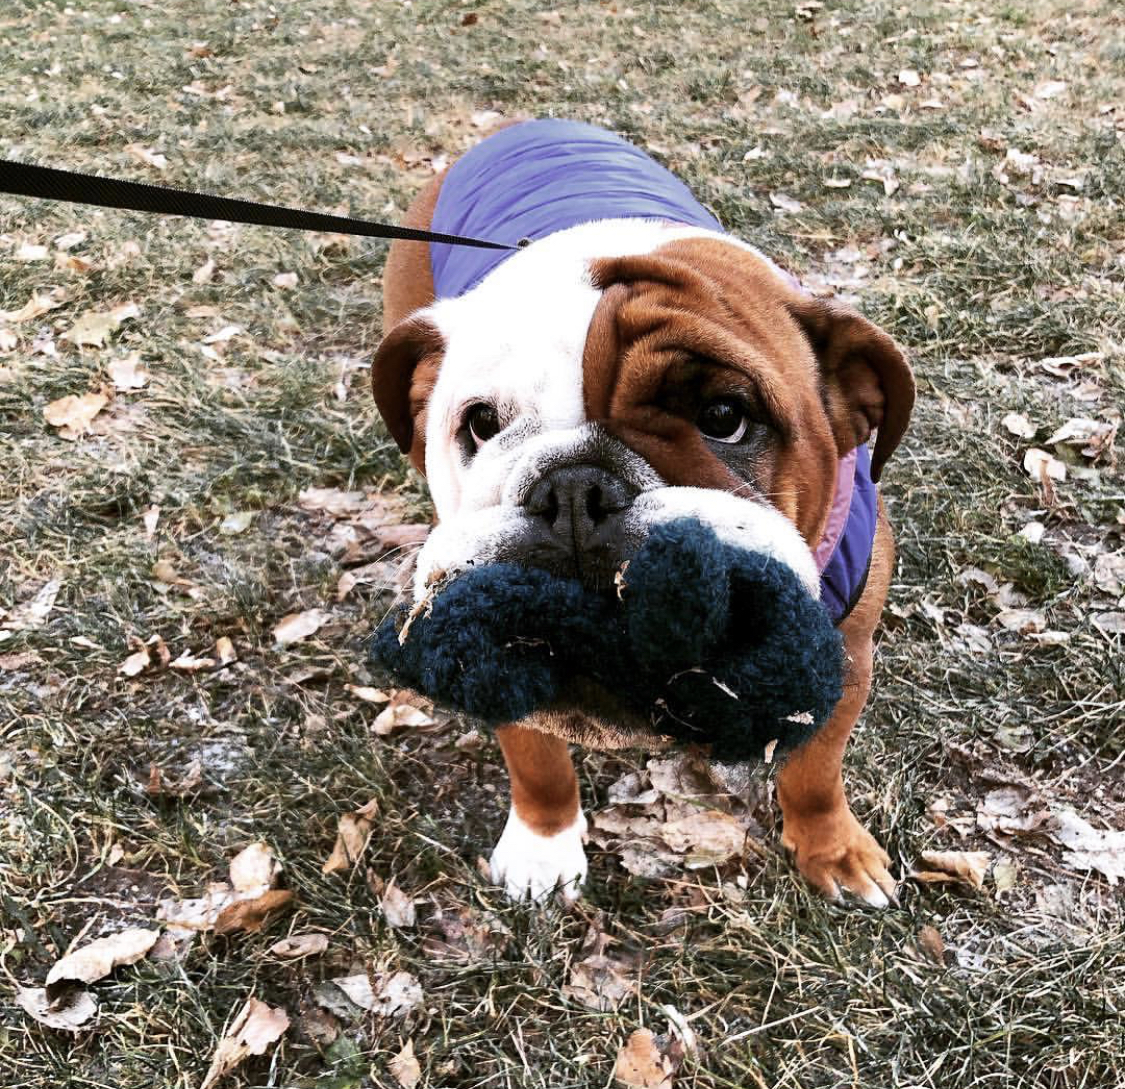 An English Bulldog wearing shirt while standing on the grass with socks in its mouth